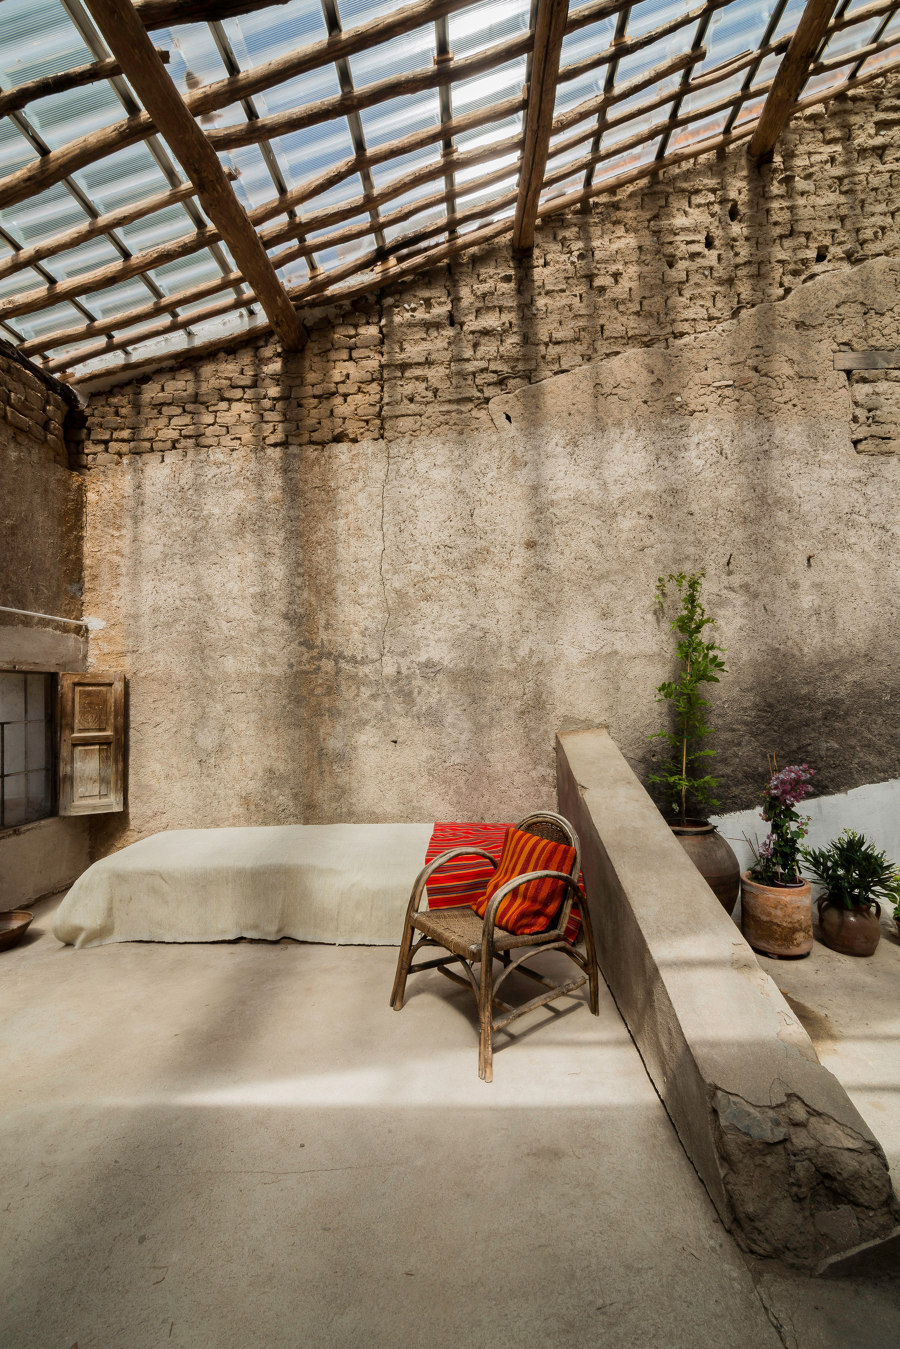 Barn conversion by G+F Arquitectos | Living space